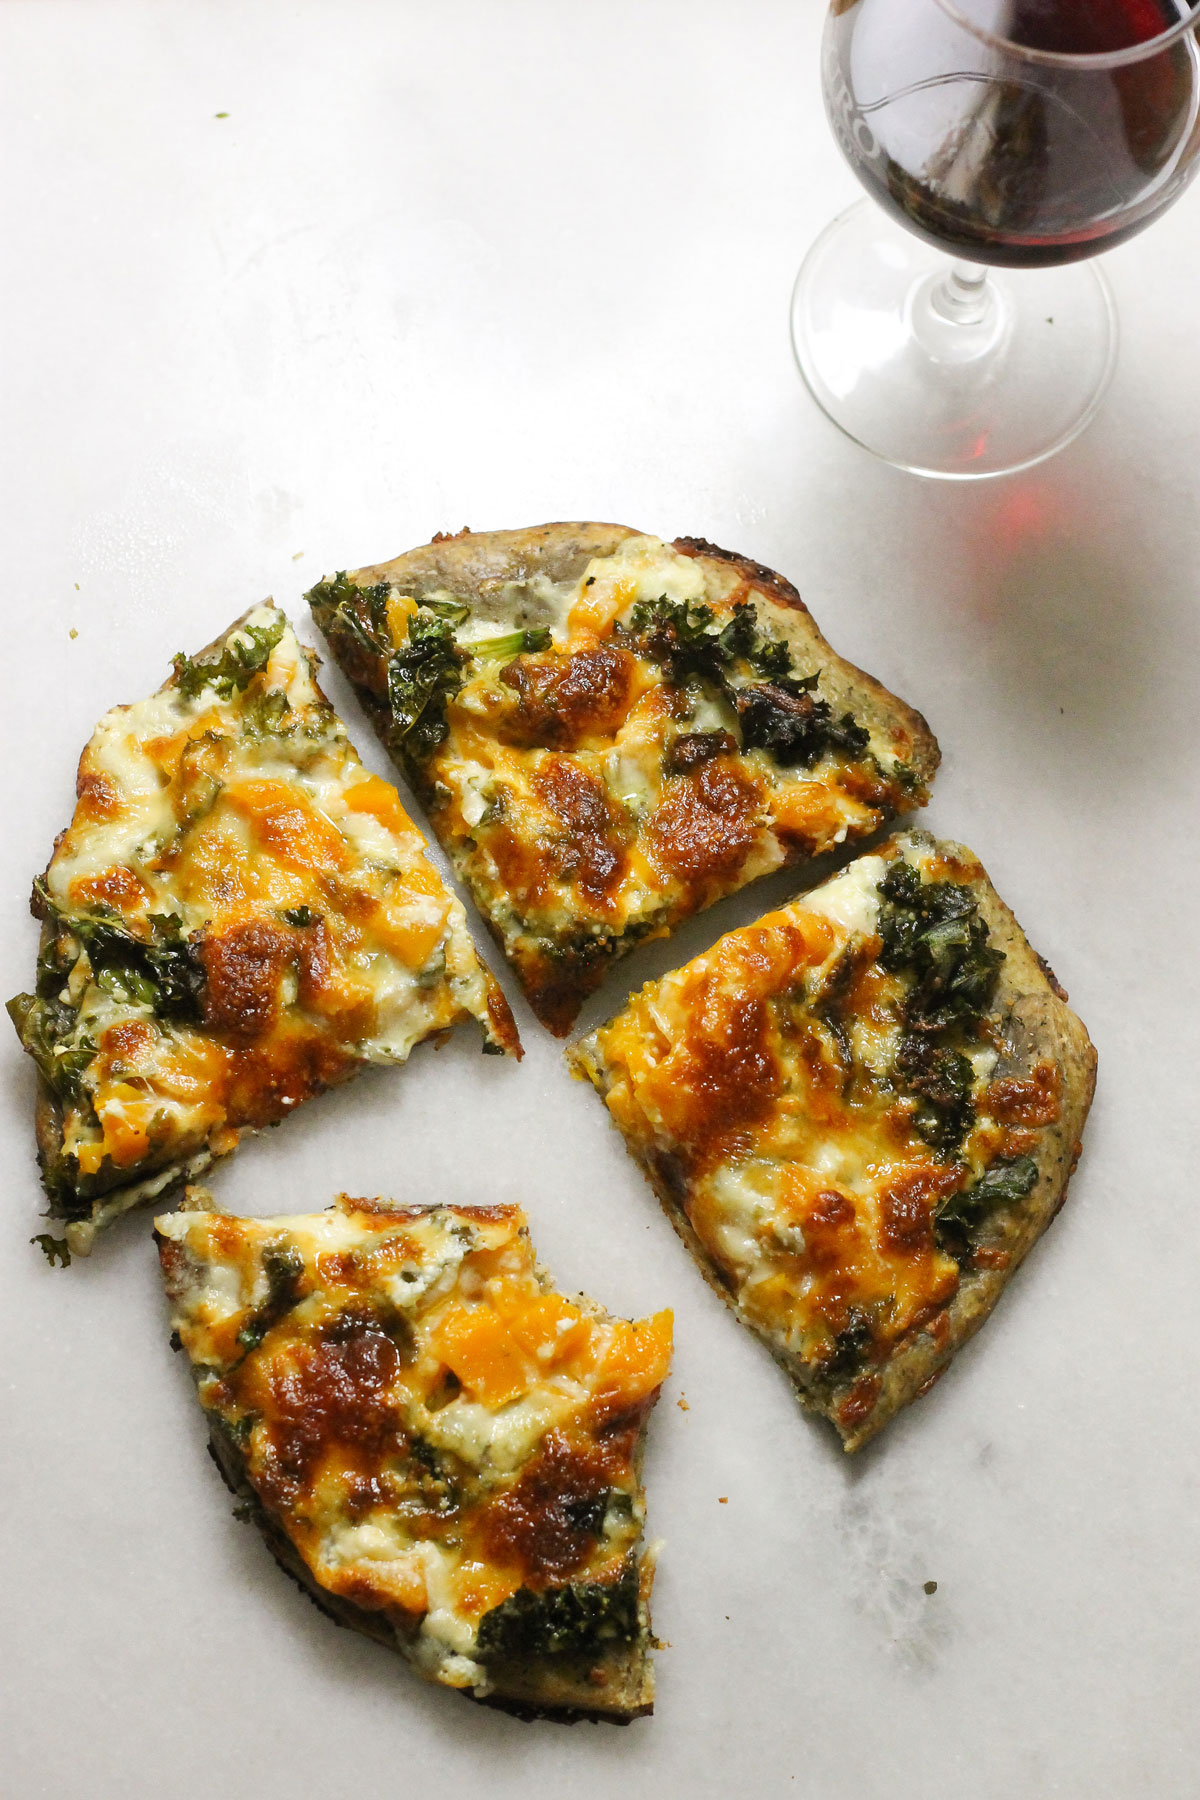 Butternut squash kale pizza with a glass of wine